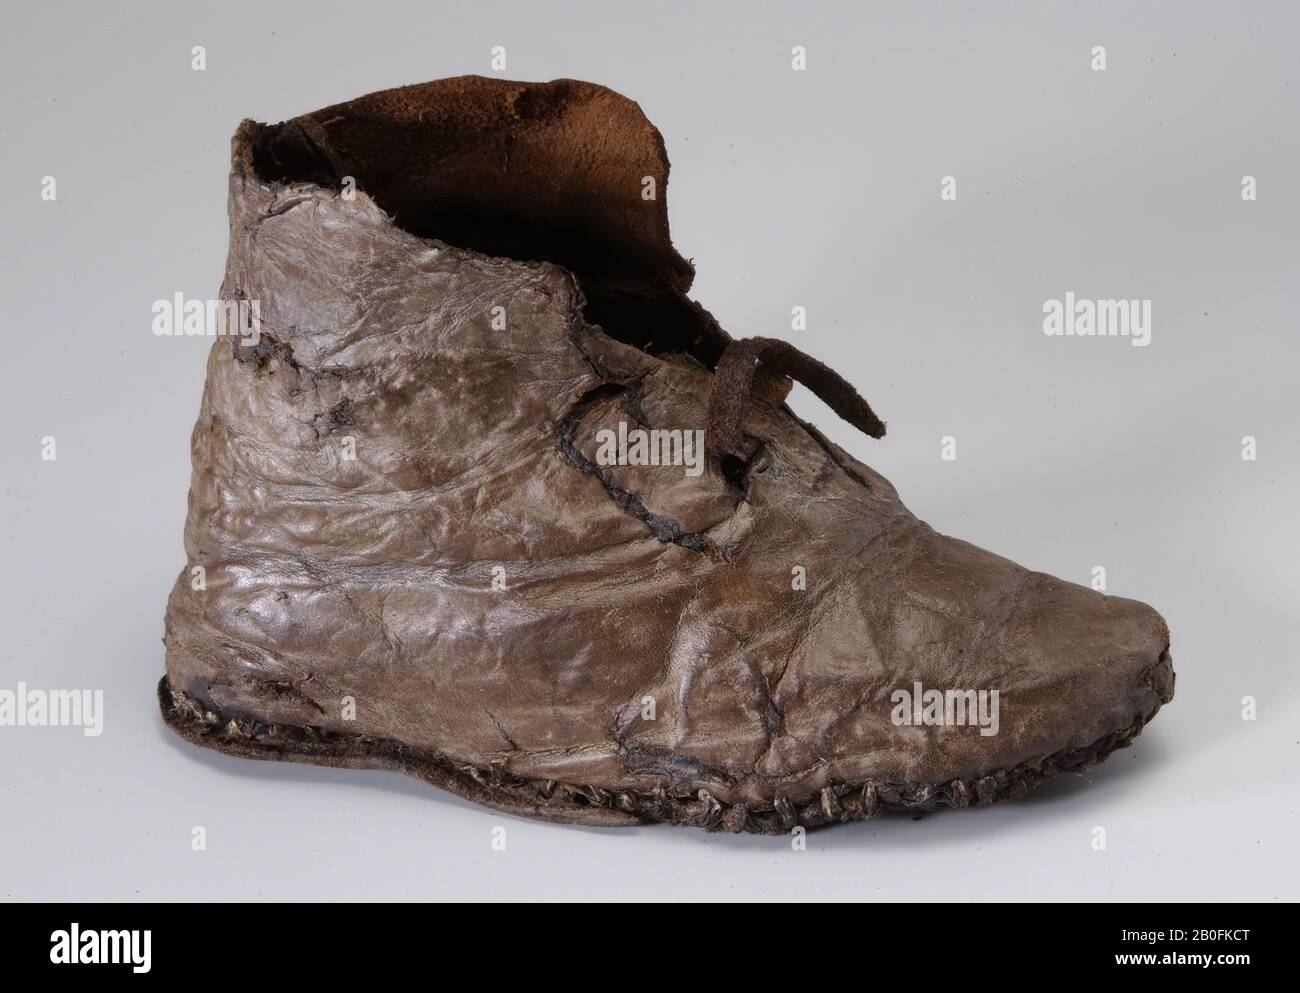 It concerns a learning children's shoe. Memo drs Marijke Brouwer dated 10 Stock Photo